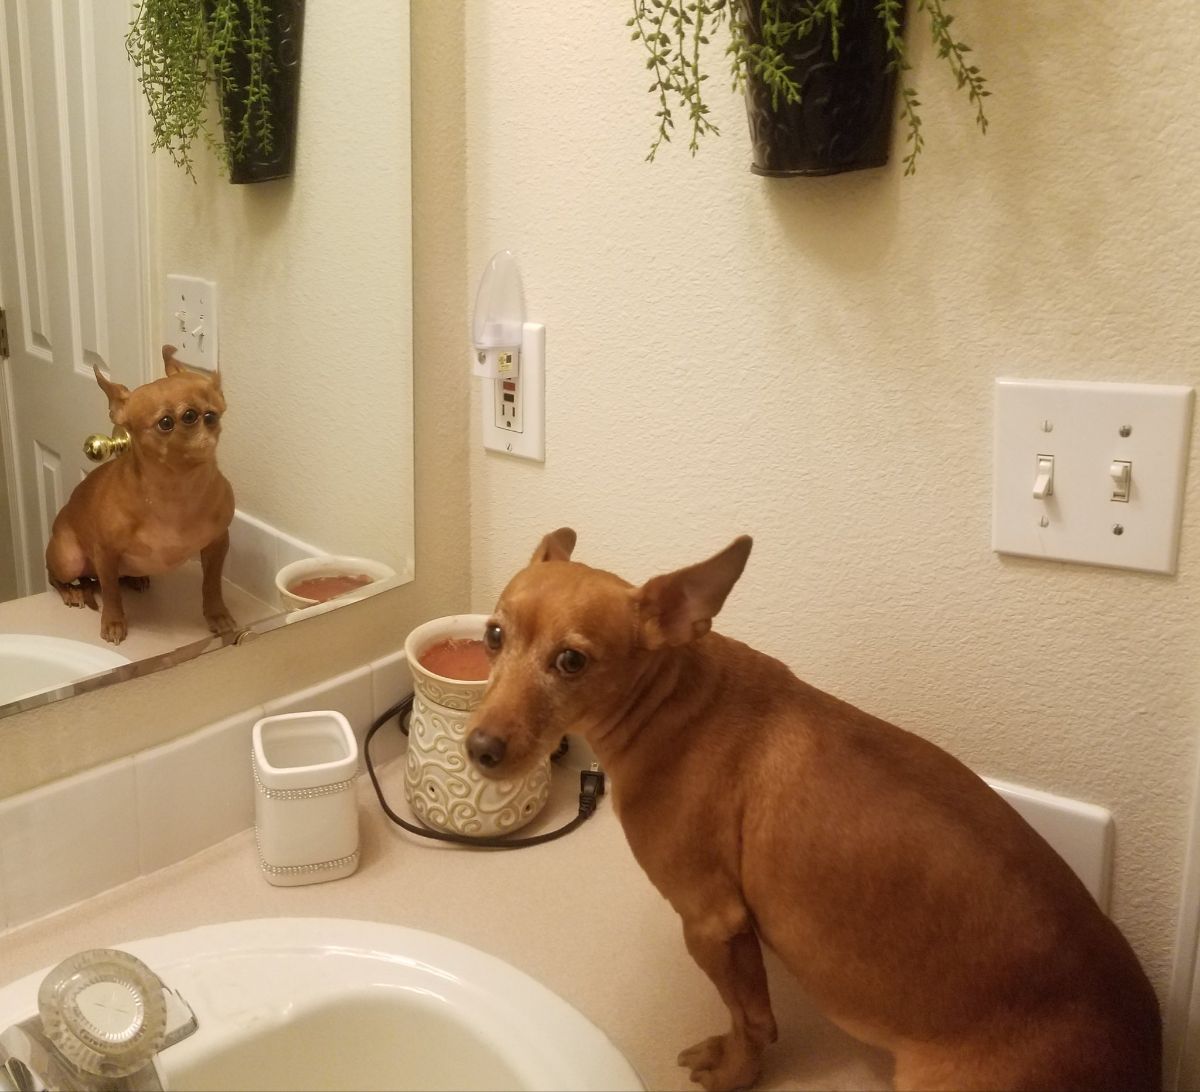 panoramic fail of brown dog sitting on bathroom counter looking back and the reflection in the mirror has 3 eyes